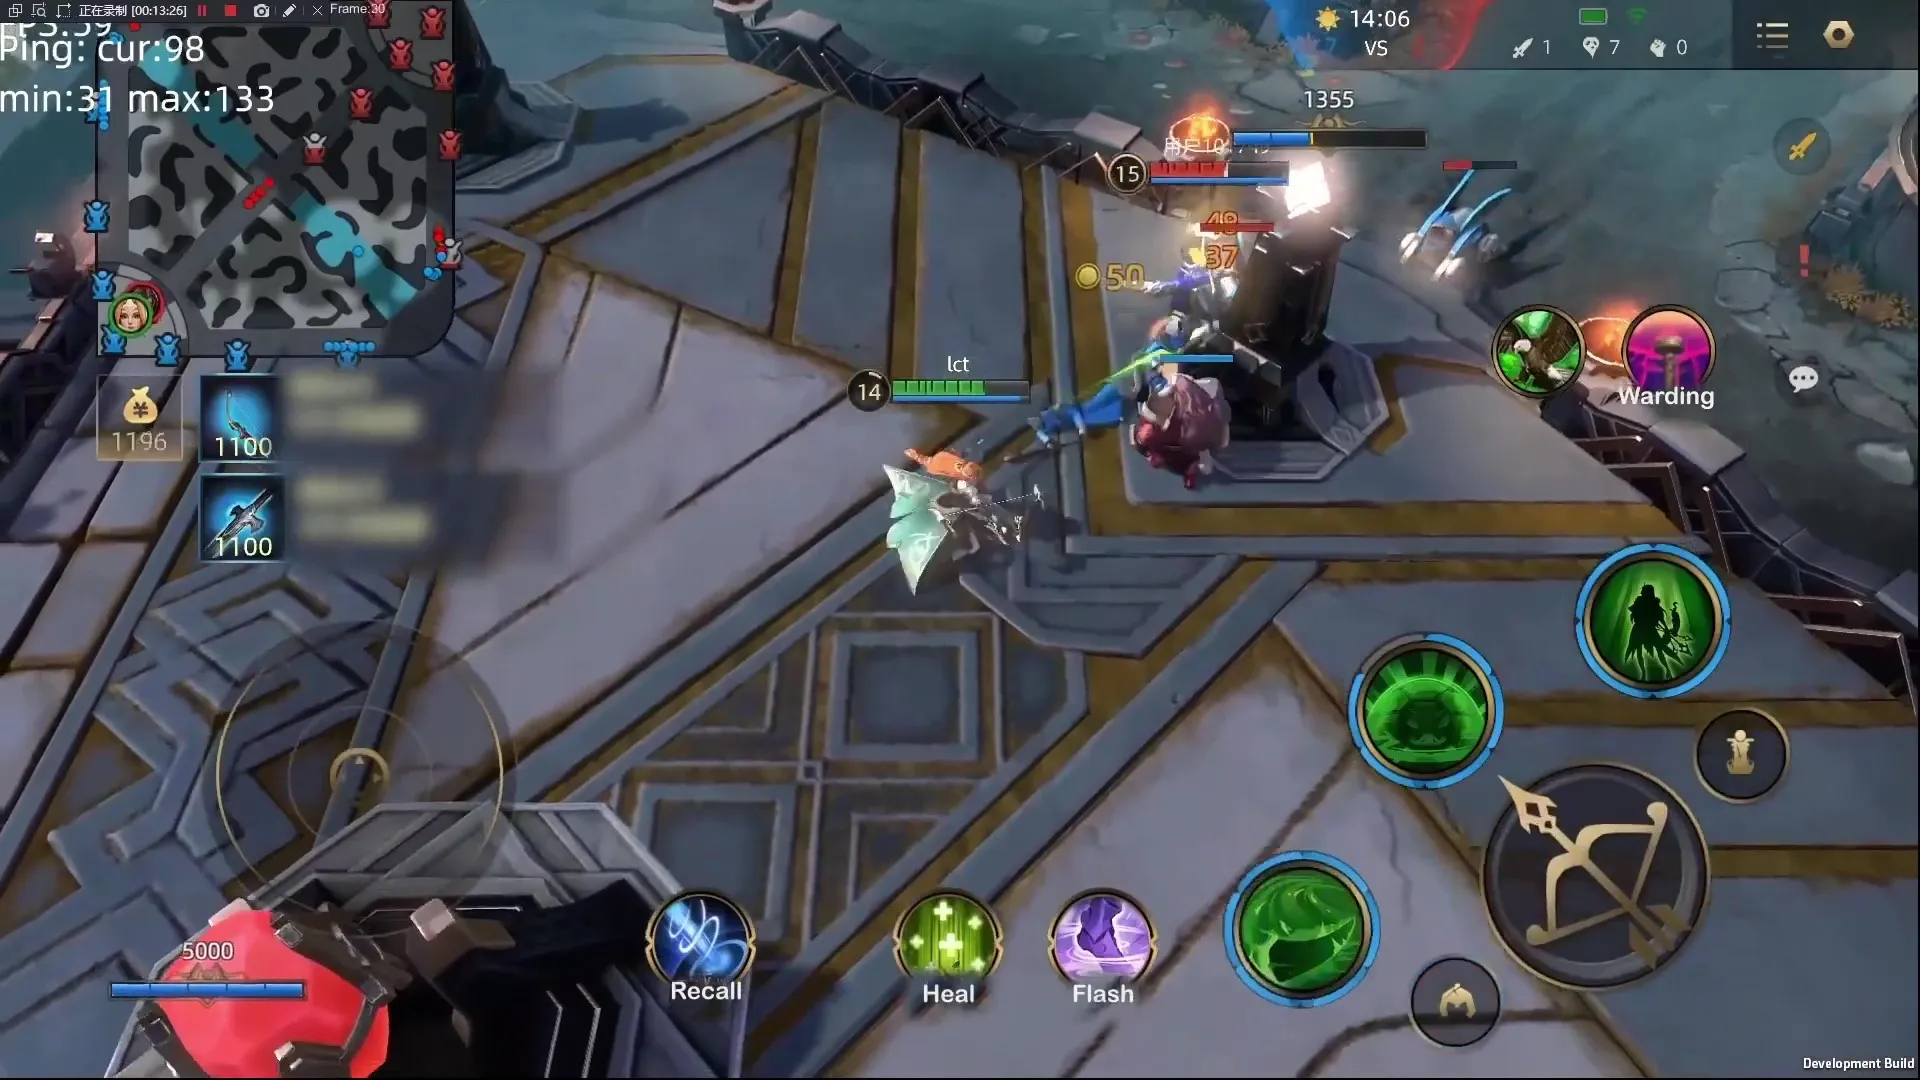 Once enemy heroes are pushing tower, defending players need to interrupt them in order to delay the push. They need to do this in order to defend their crystal.